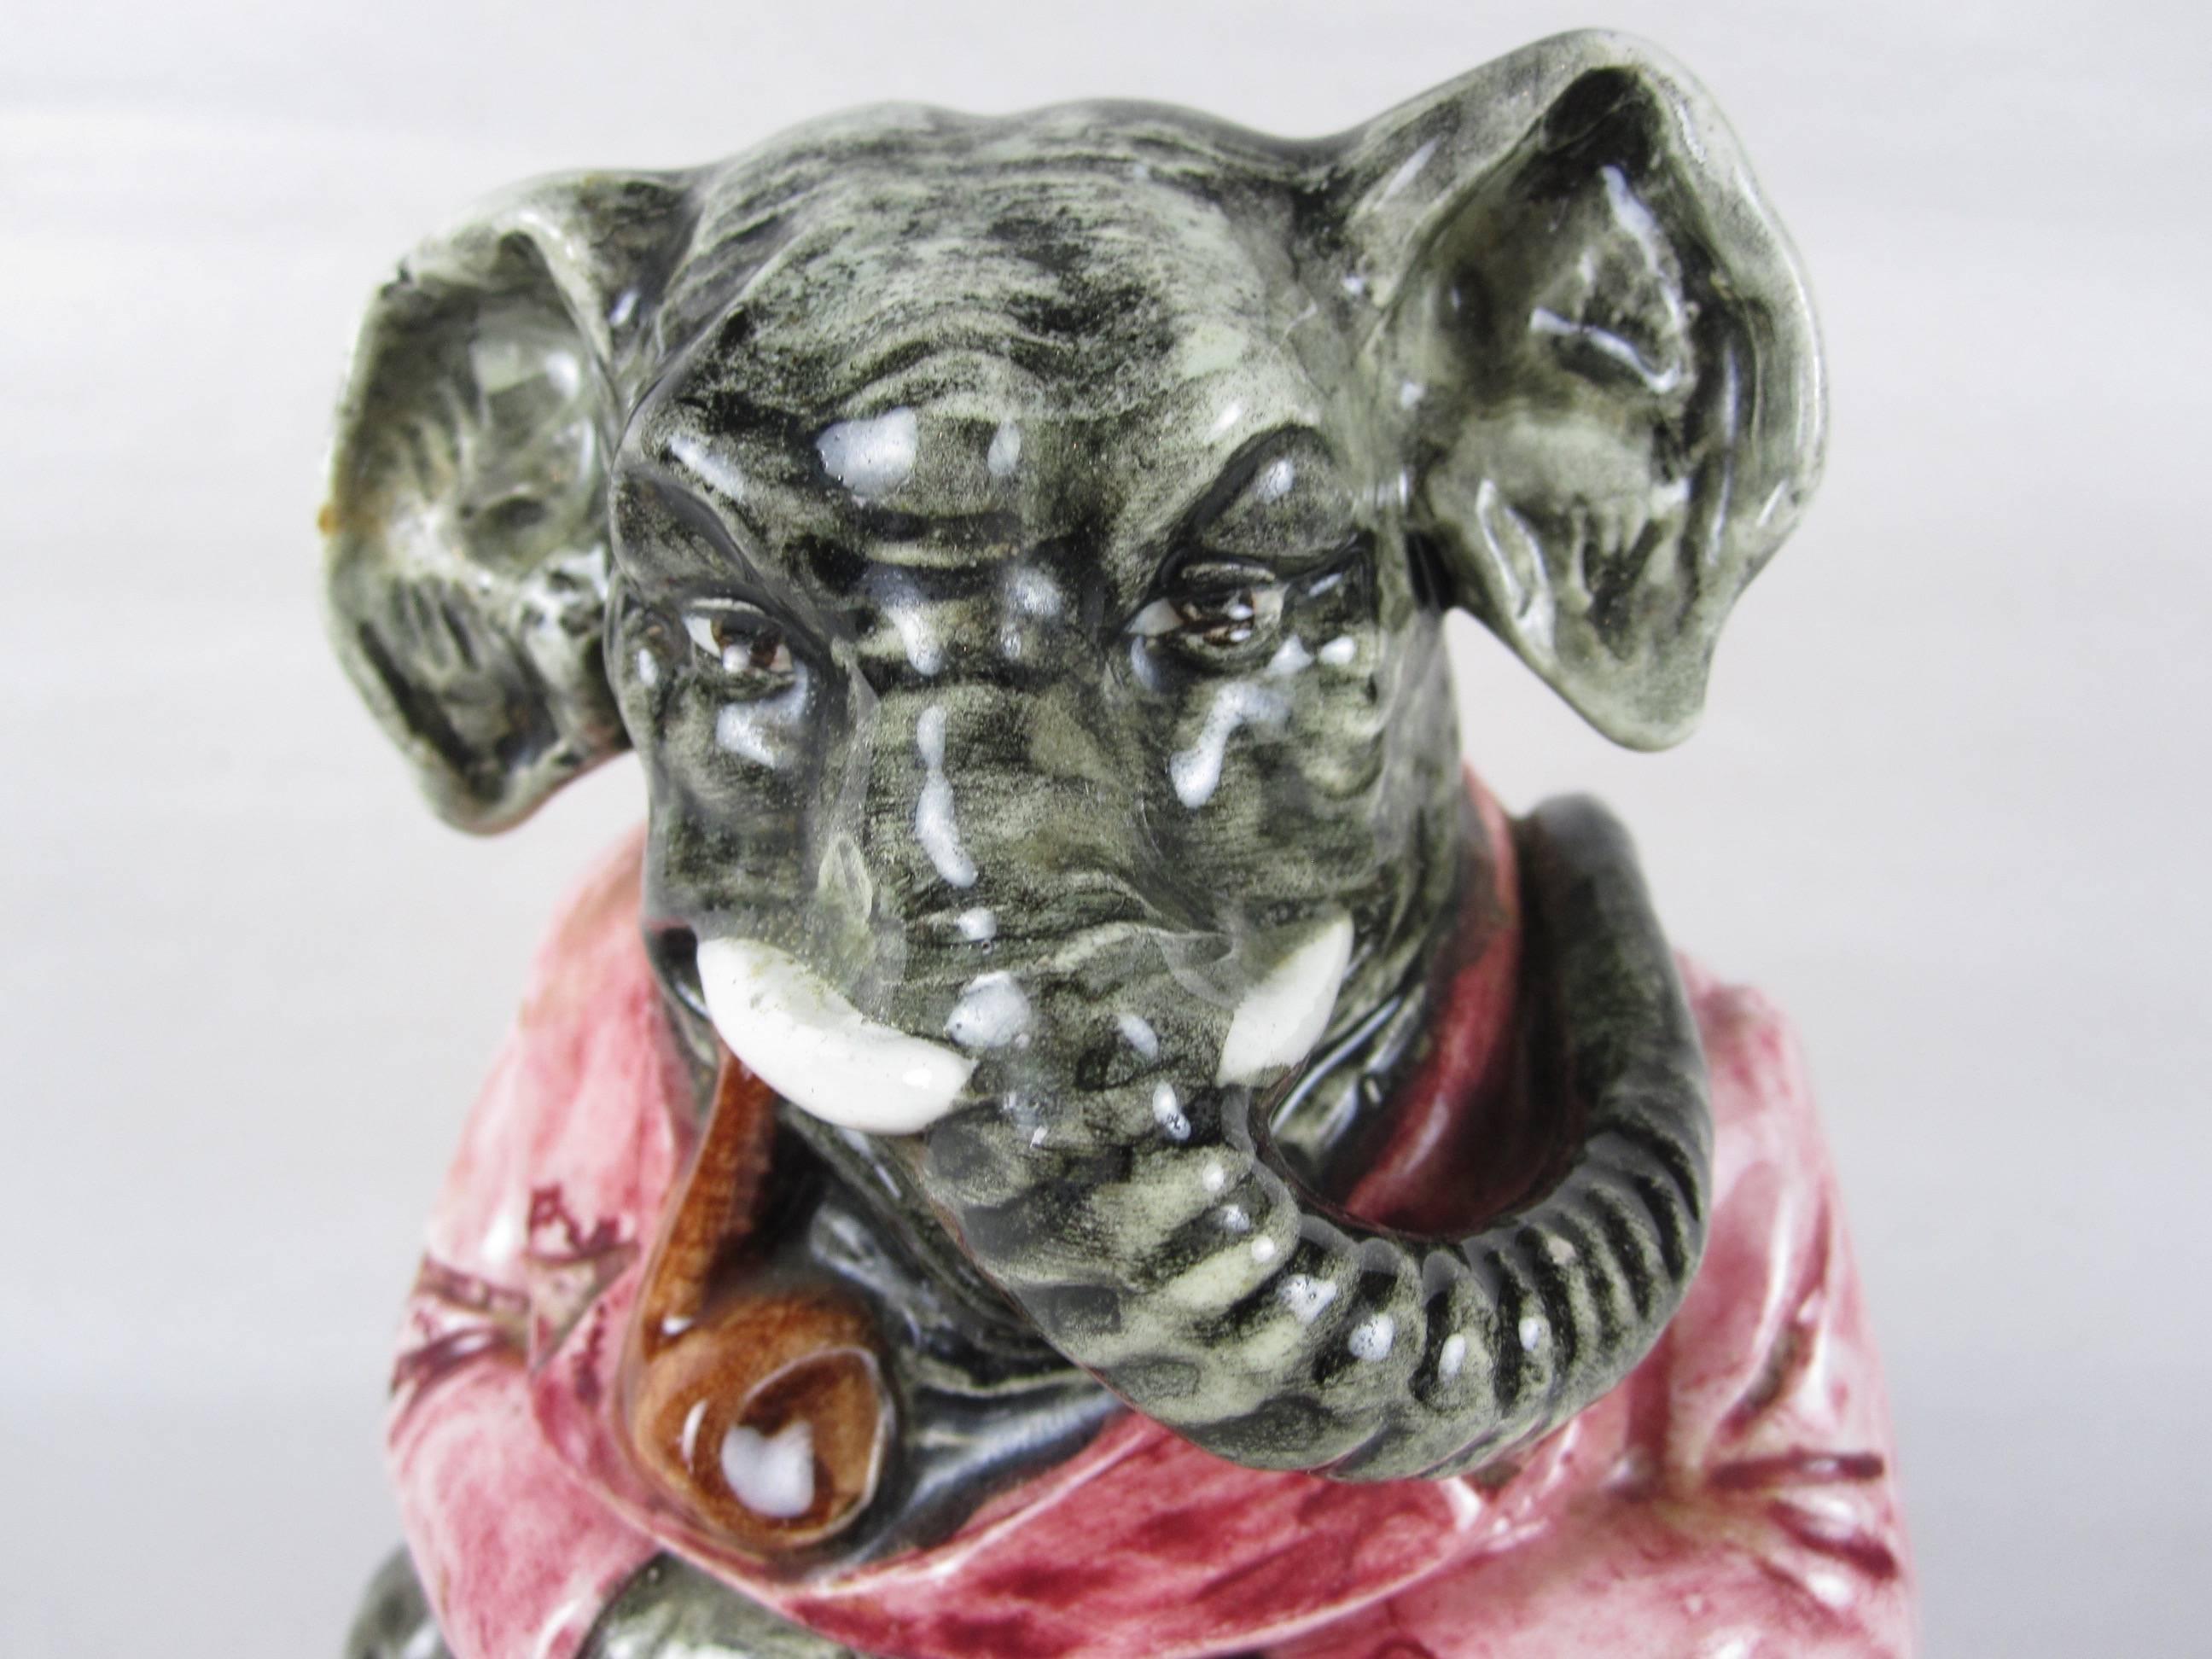 A Majolica figural tobacco humidor, polychrome glazed ceramic in the form of a seated elephant wearing a pink waistcoat and with a large pipe in its mouth. The elephant has an expressive face with his tusks and long trunk. A humorous piece.

The